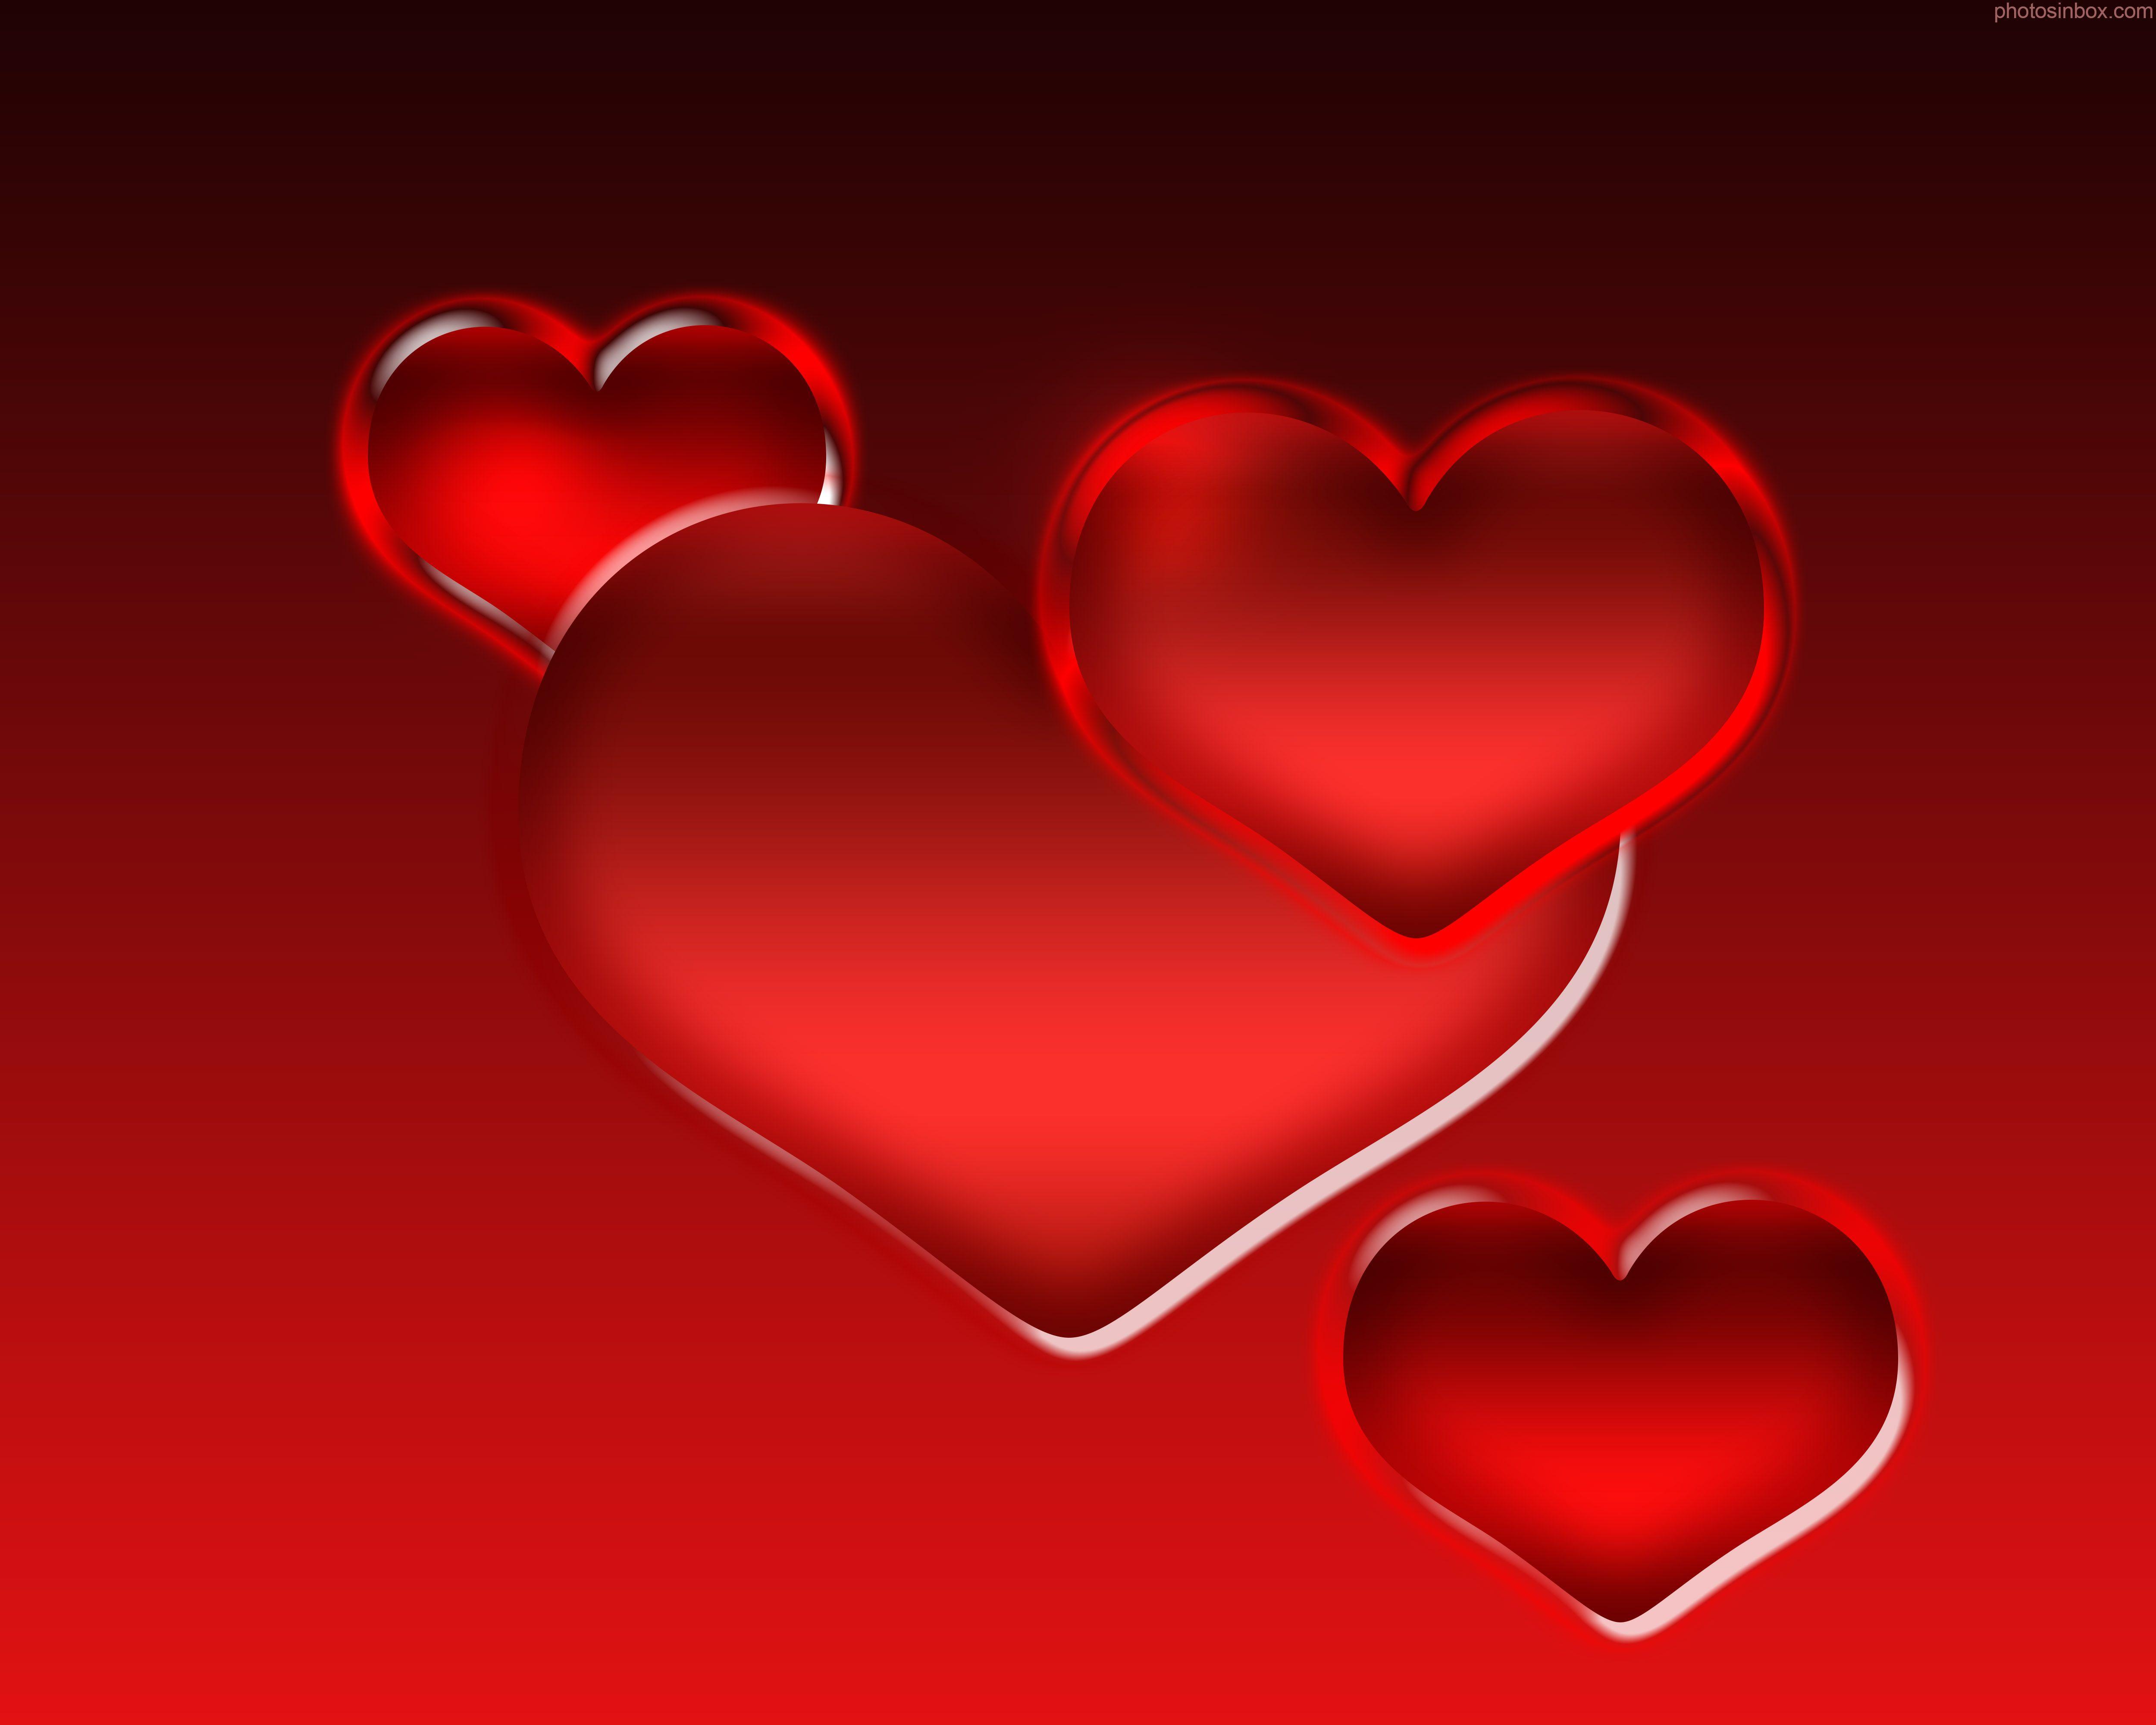 Black Background Red Heart Wallpaper Red Heart With Black Backgrounds Wallpaper Cave Feel Free To Download Share Comment And Discuss Every Wallpaper You Like Gilbert Humphries - dark heart texture roblox